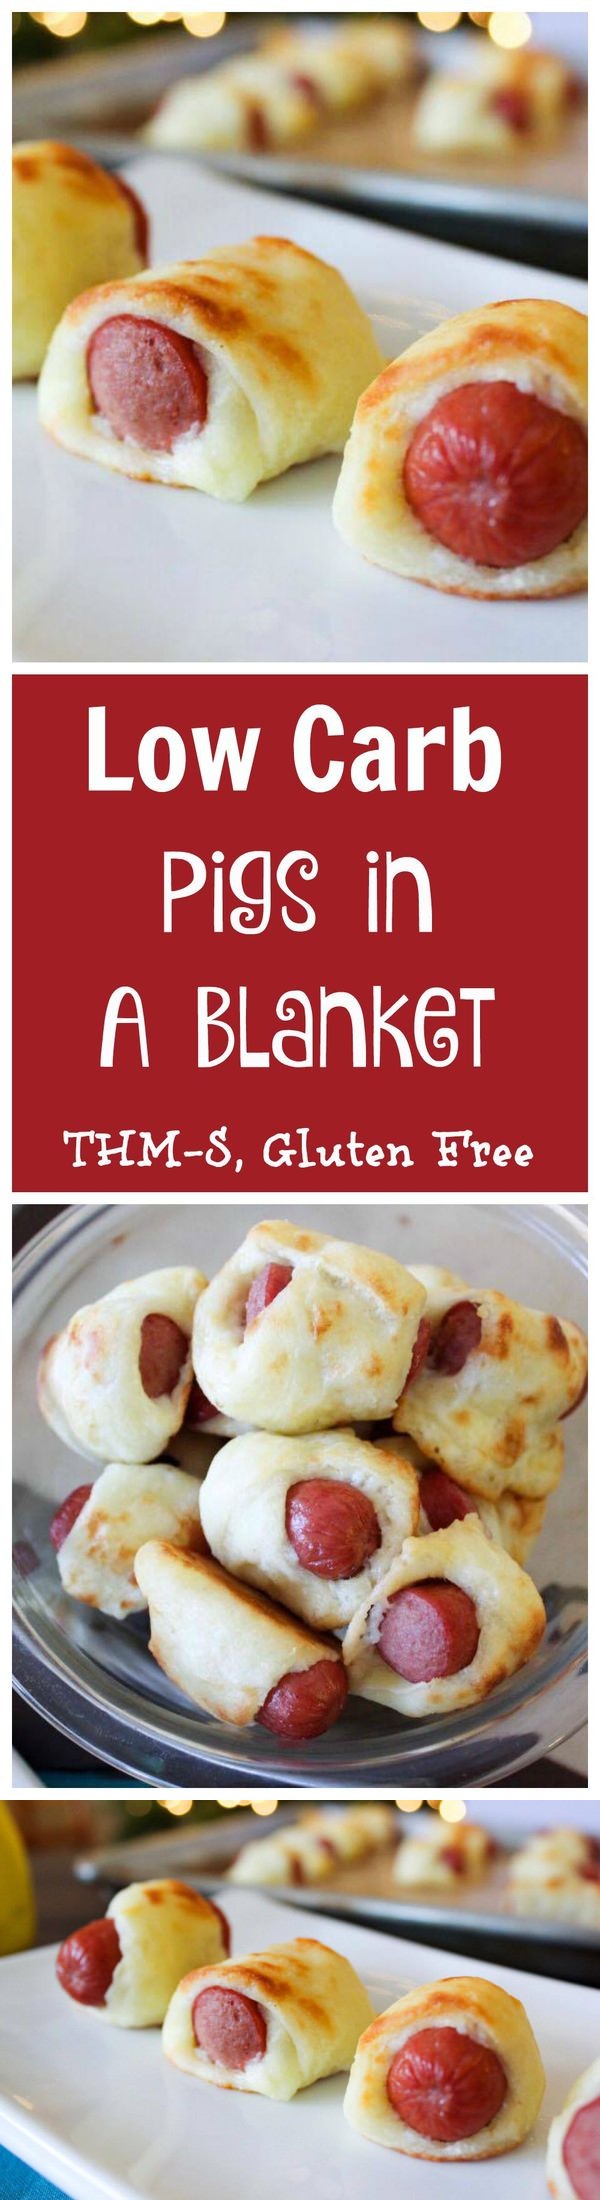 Low Carb Pigs in a Blanket (THM-S